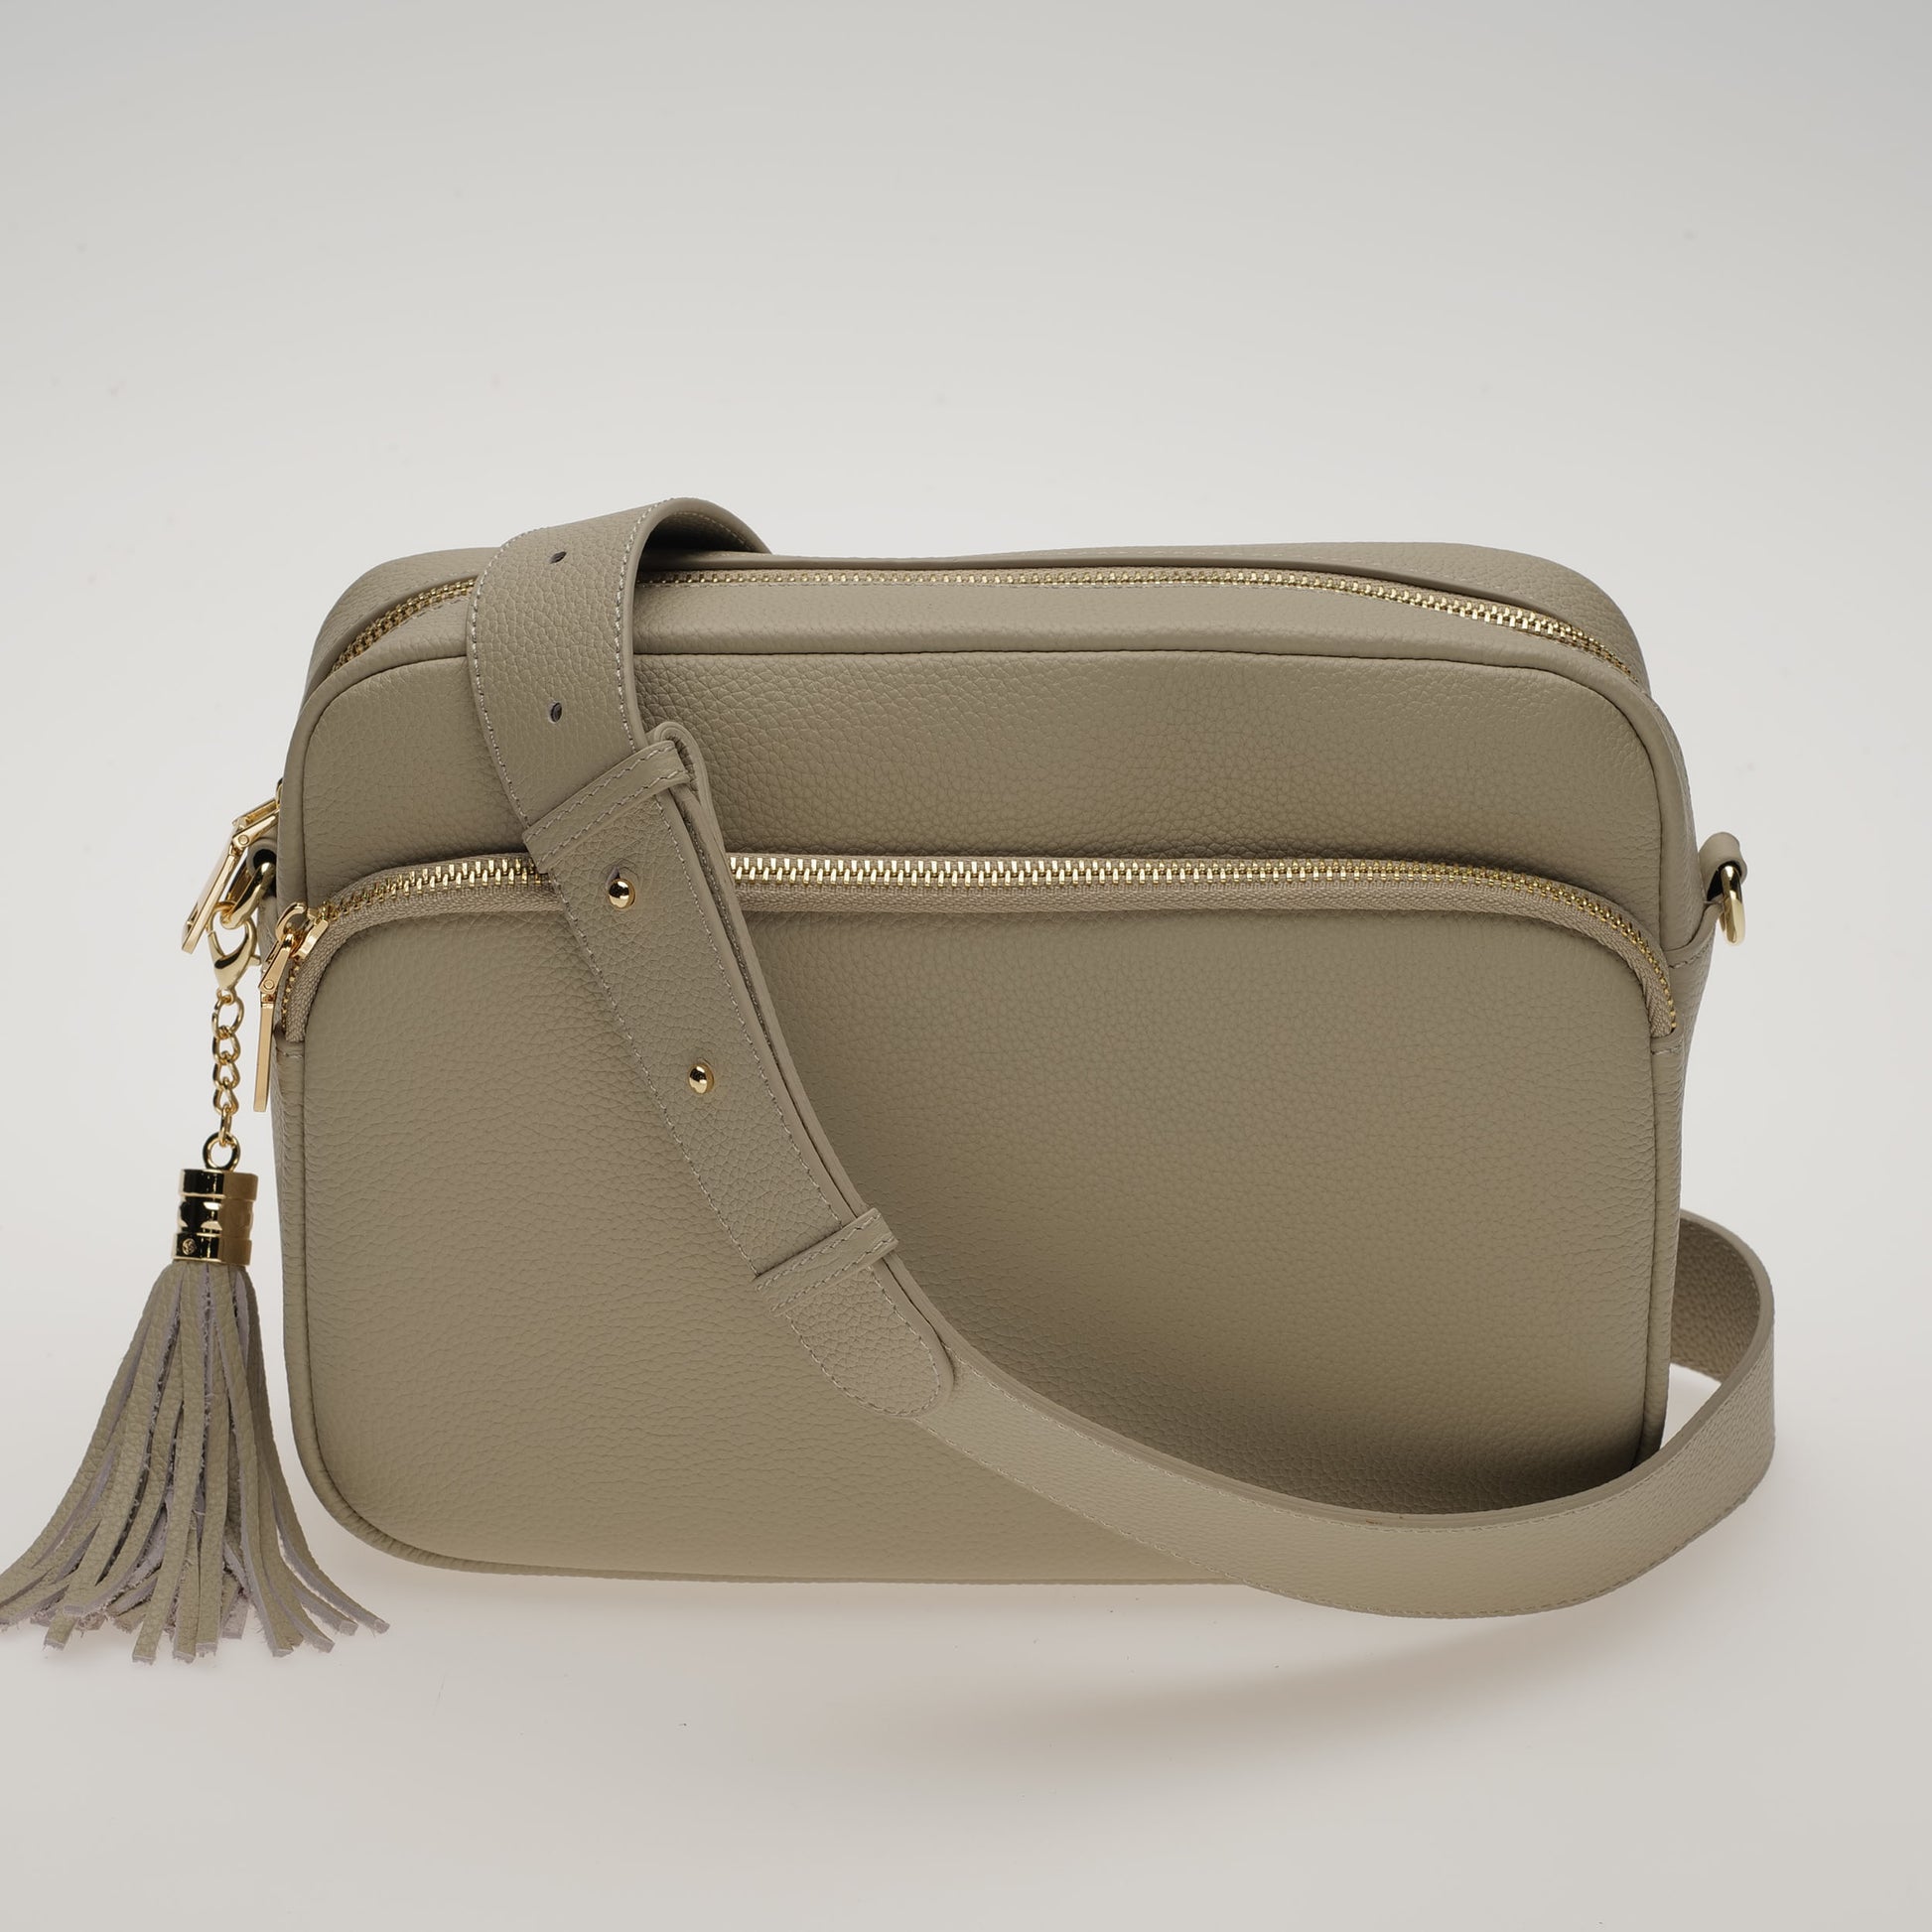 Swoon London Downton XL in Calma Stone with Matching Leather Strap